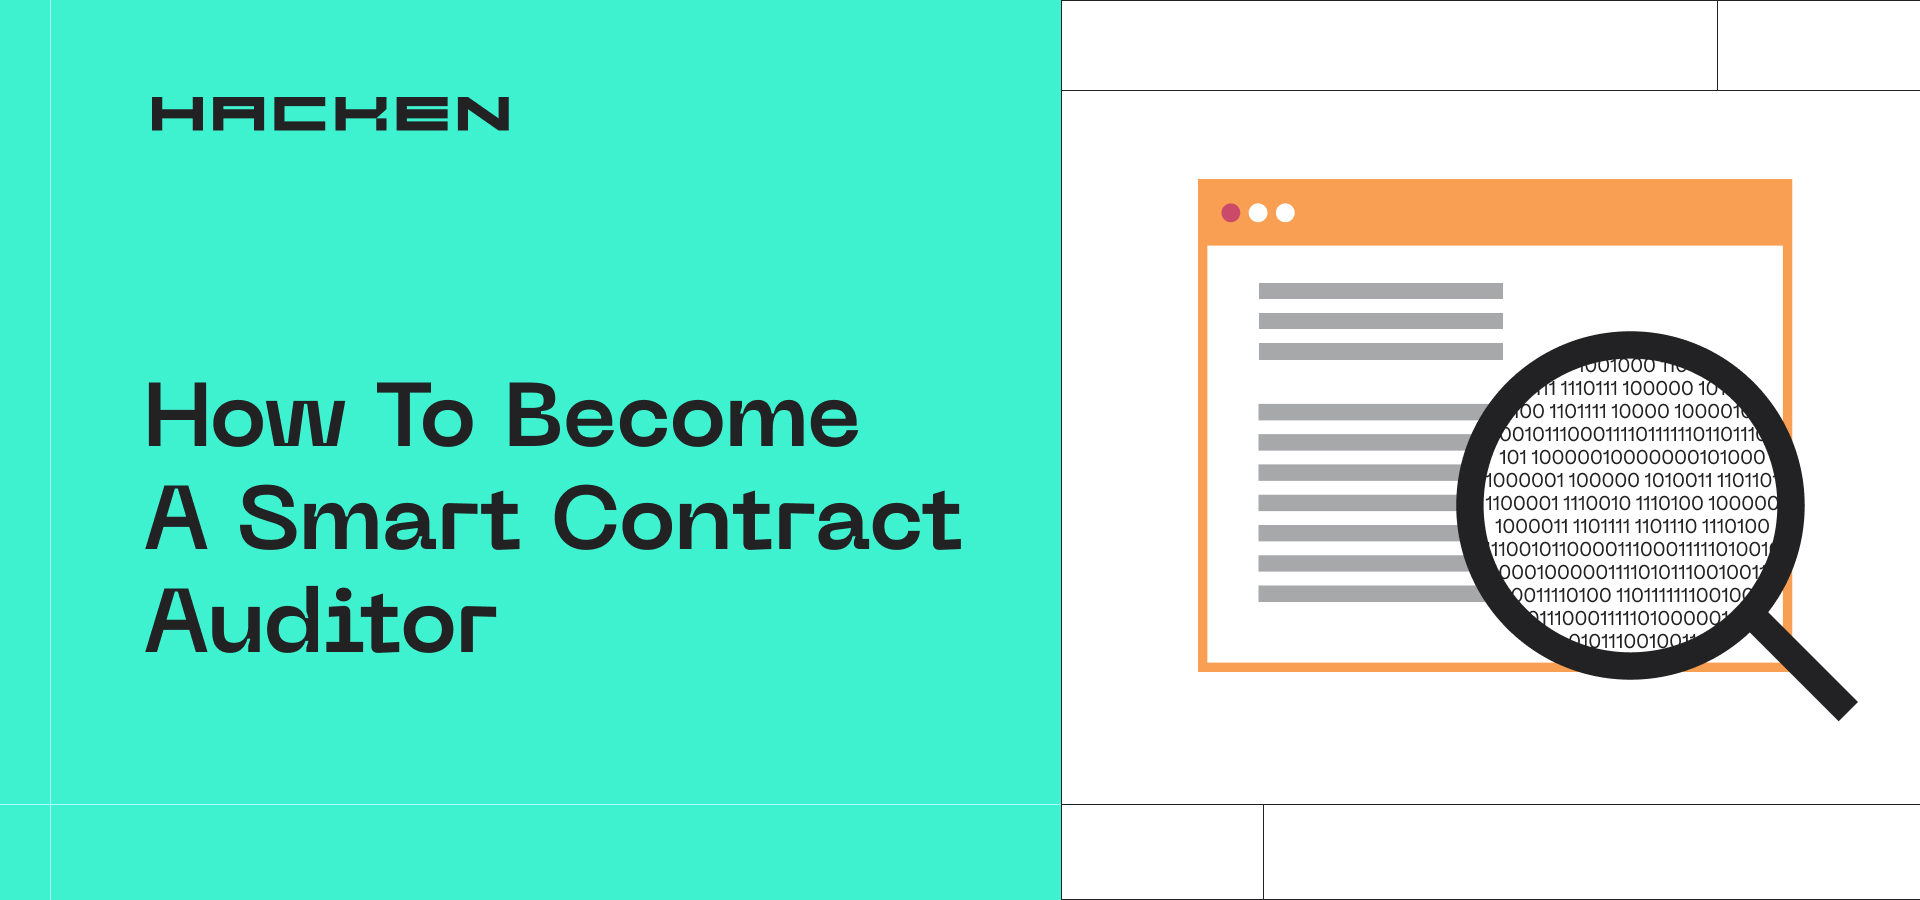 How To Become A Smart Contract Auditor